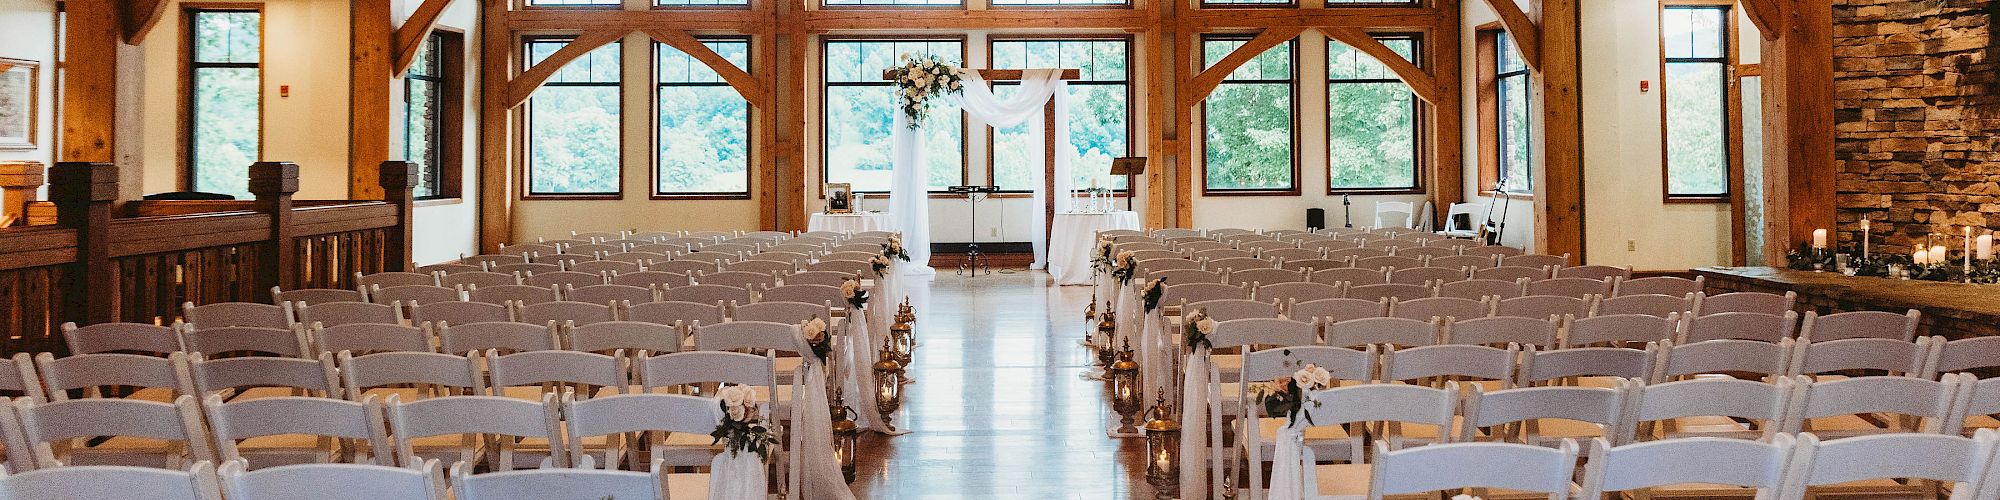 This image shows a beautifully decorated wooden wedding venue with rows of white chairs arranged facing an altar, and chandeliers overhead.